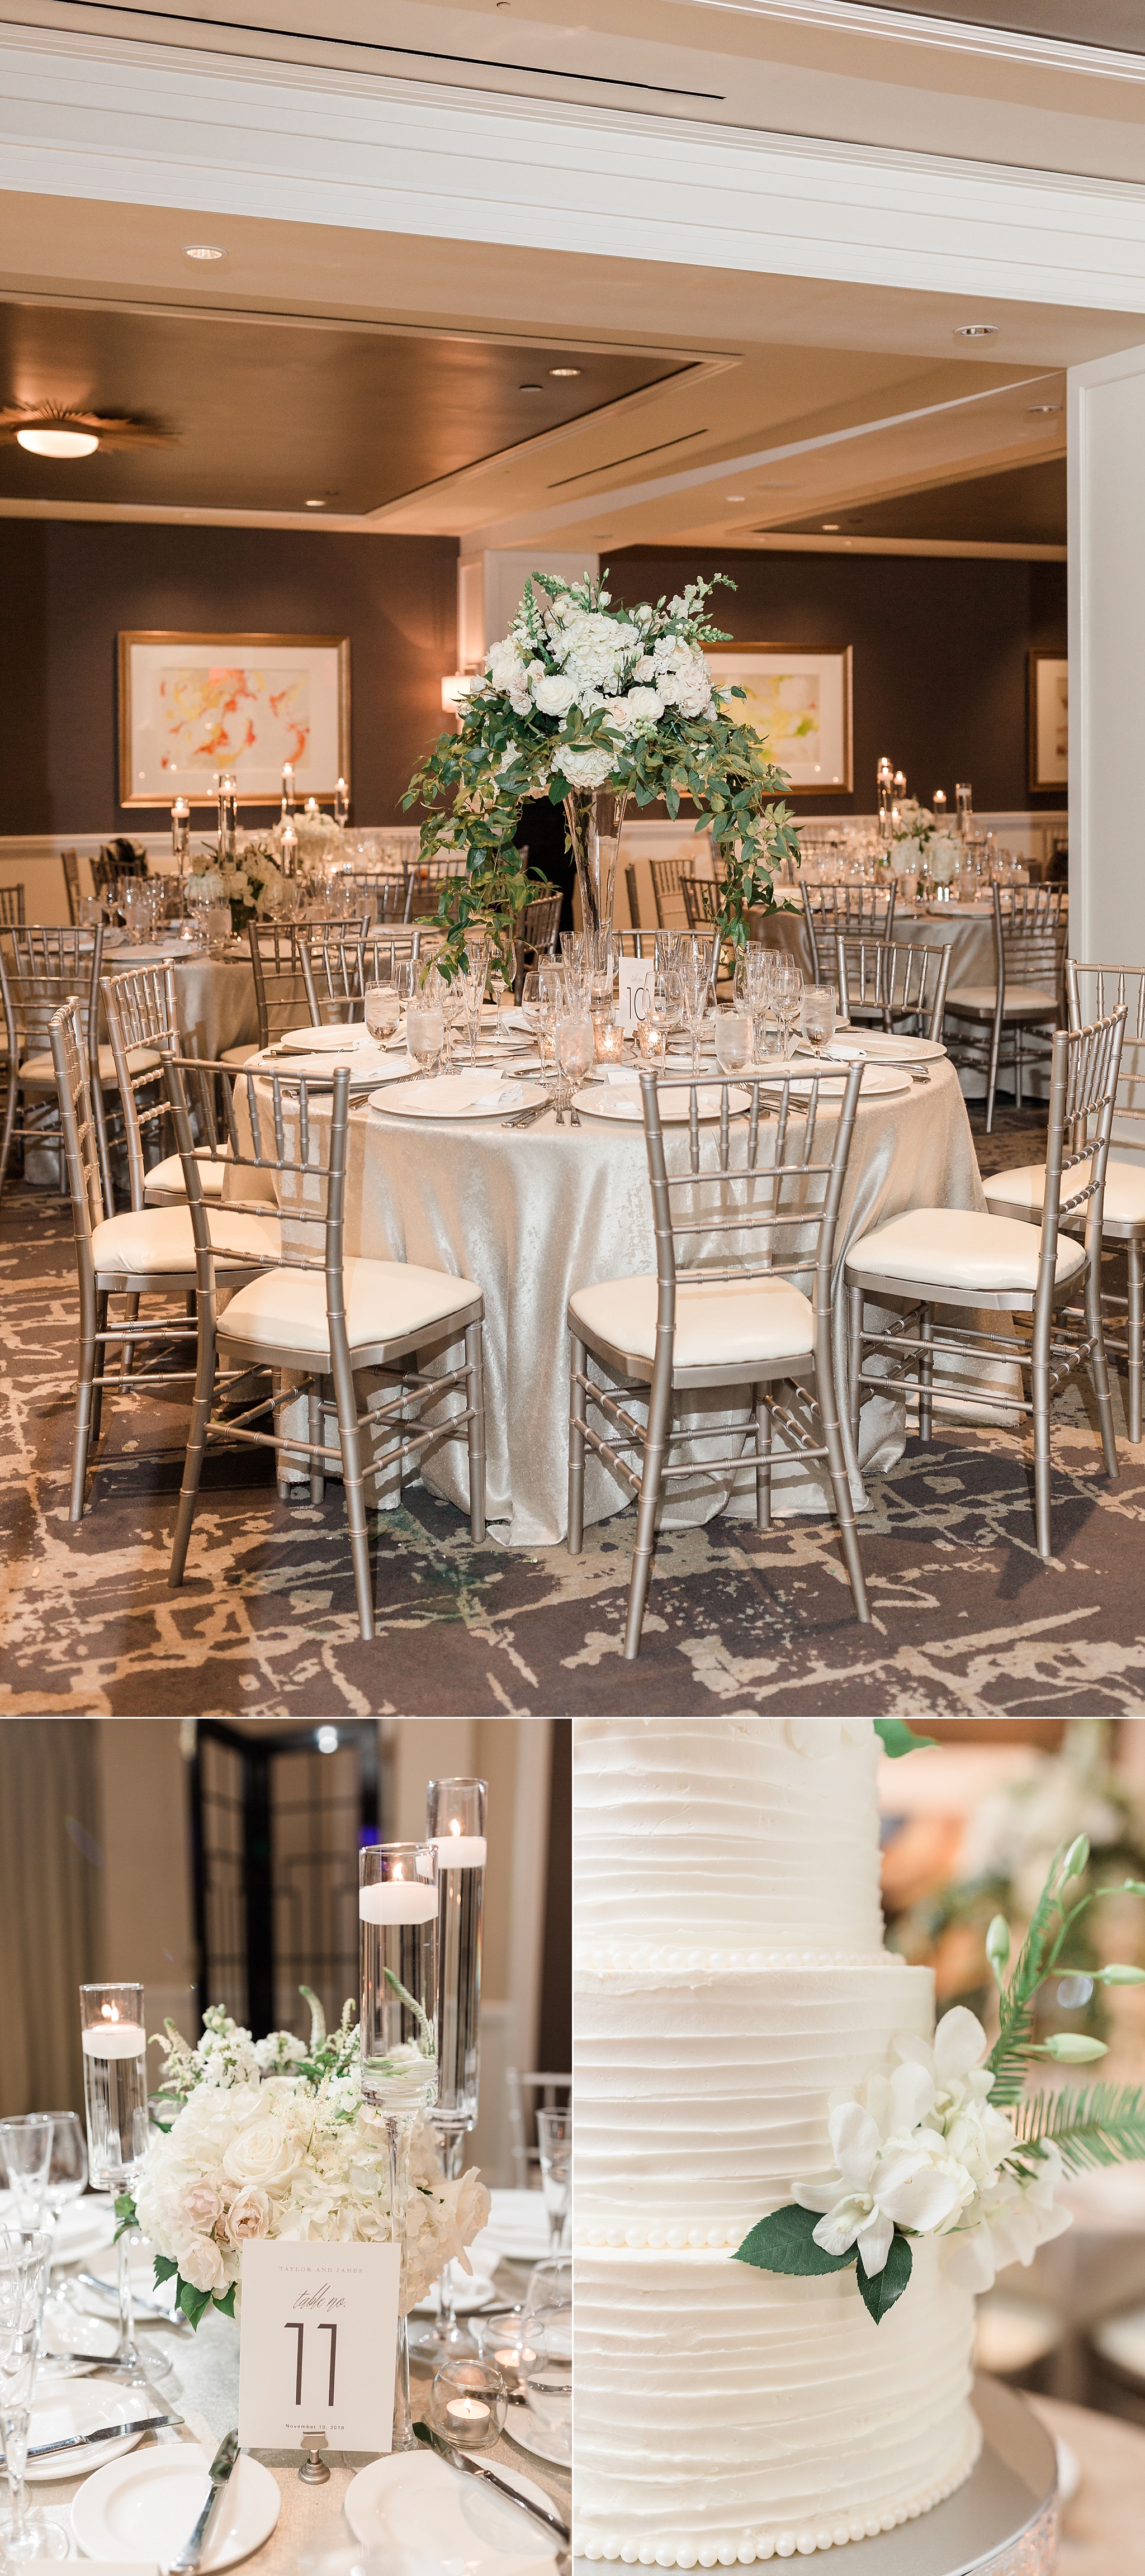 A classic black tie wedding at the Washington National Cathedral in DC with a reception at the Four Seasons in Georgetown.